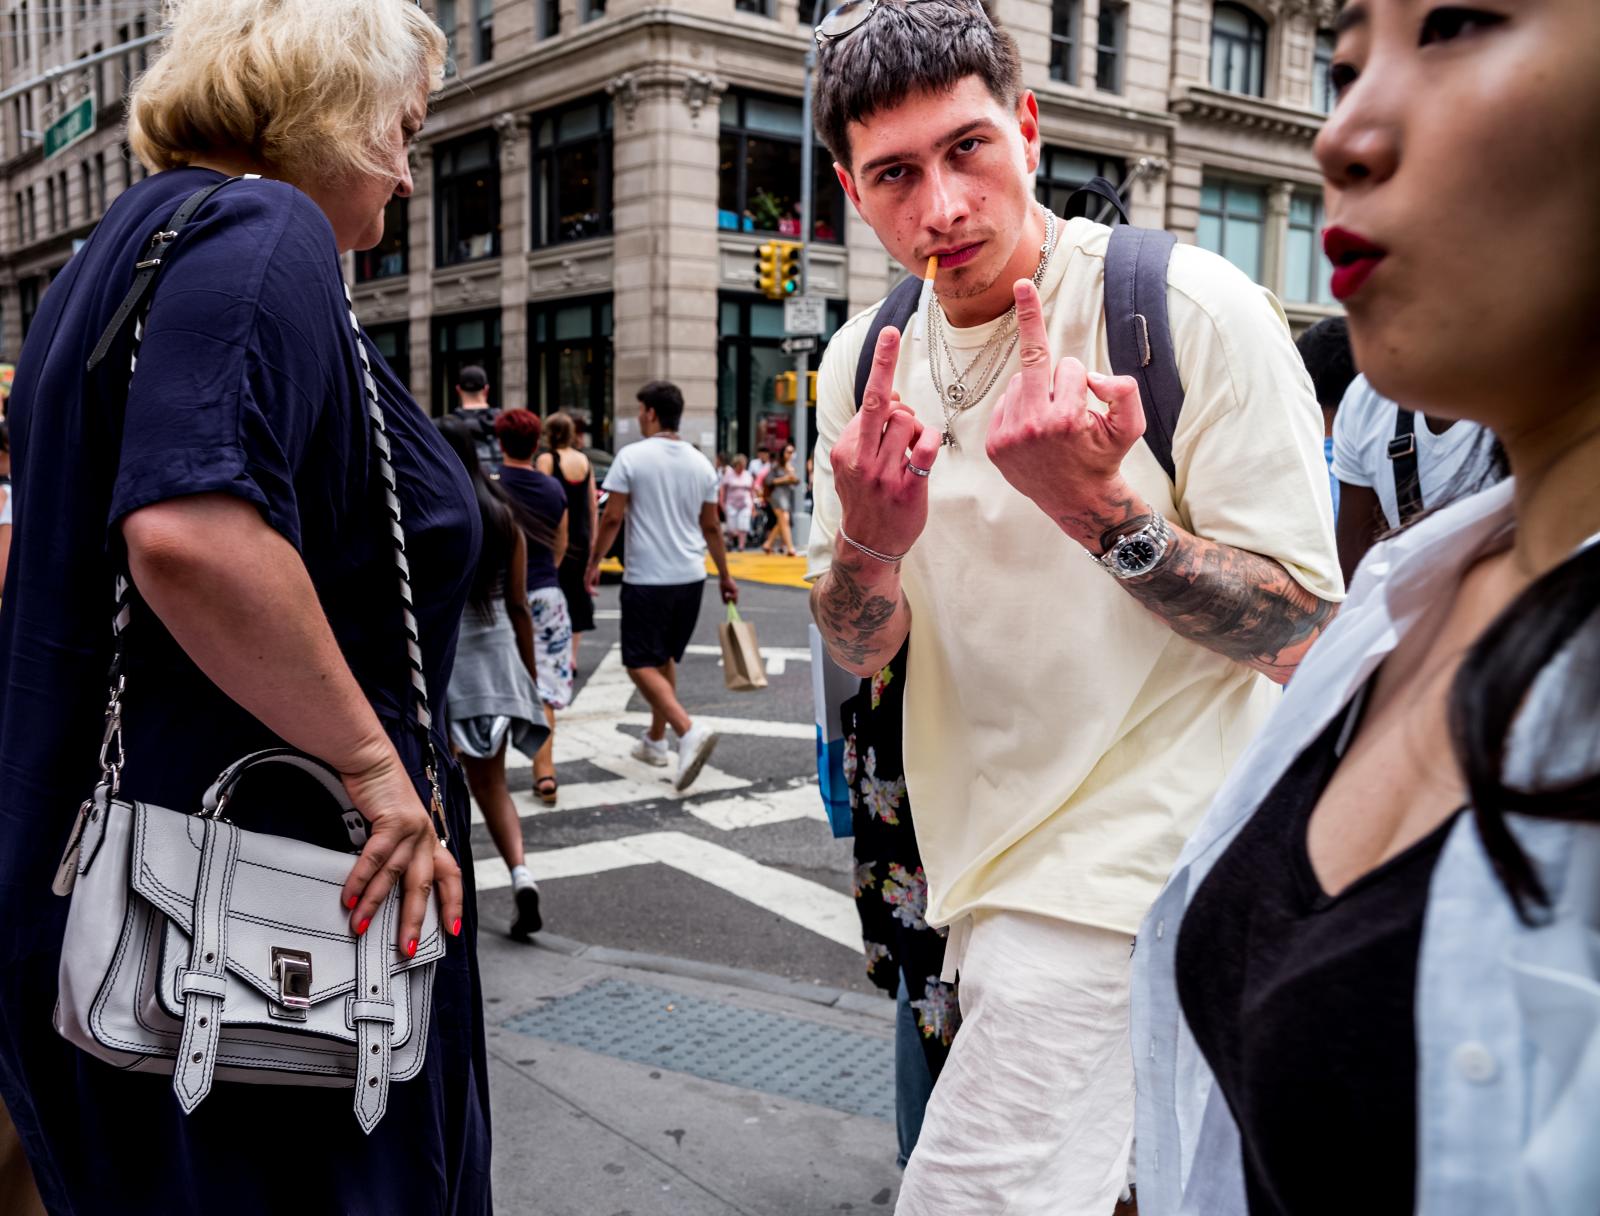 Image from Seeing You See Me -  Broadway/Spring Street, Manhattan NYC  July 2018 